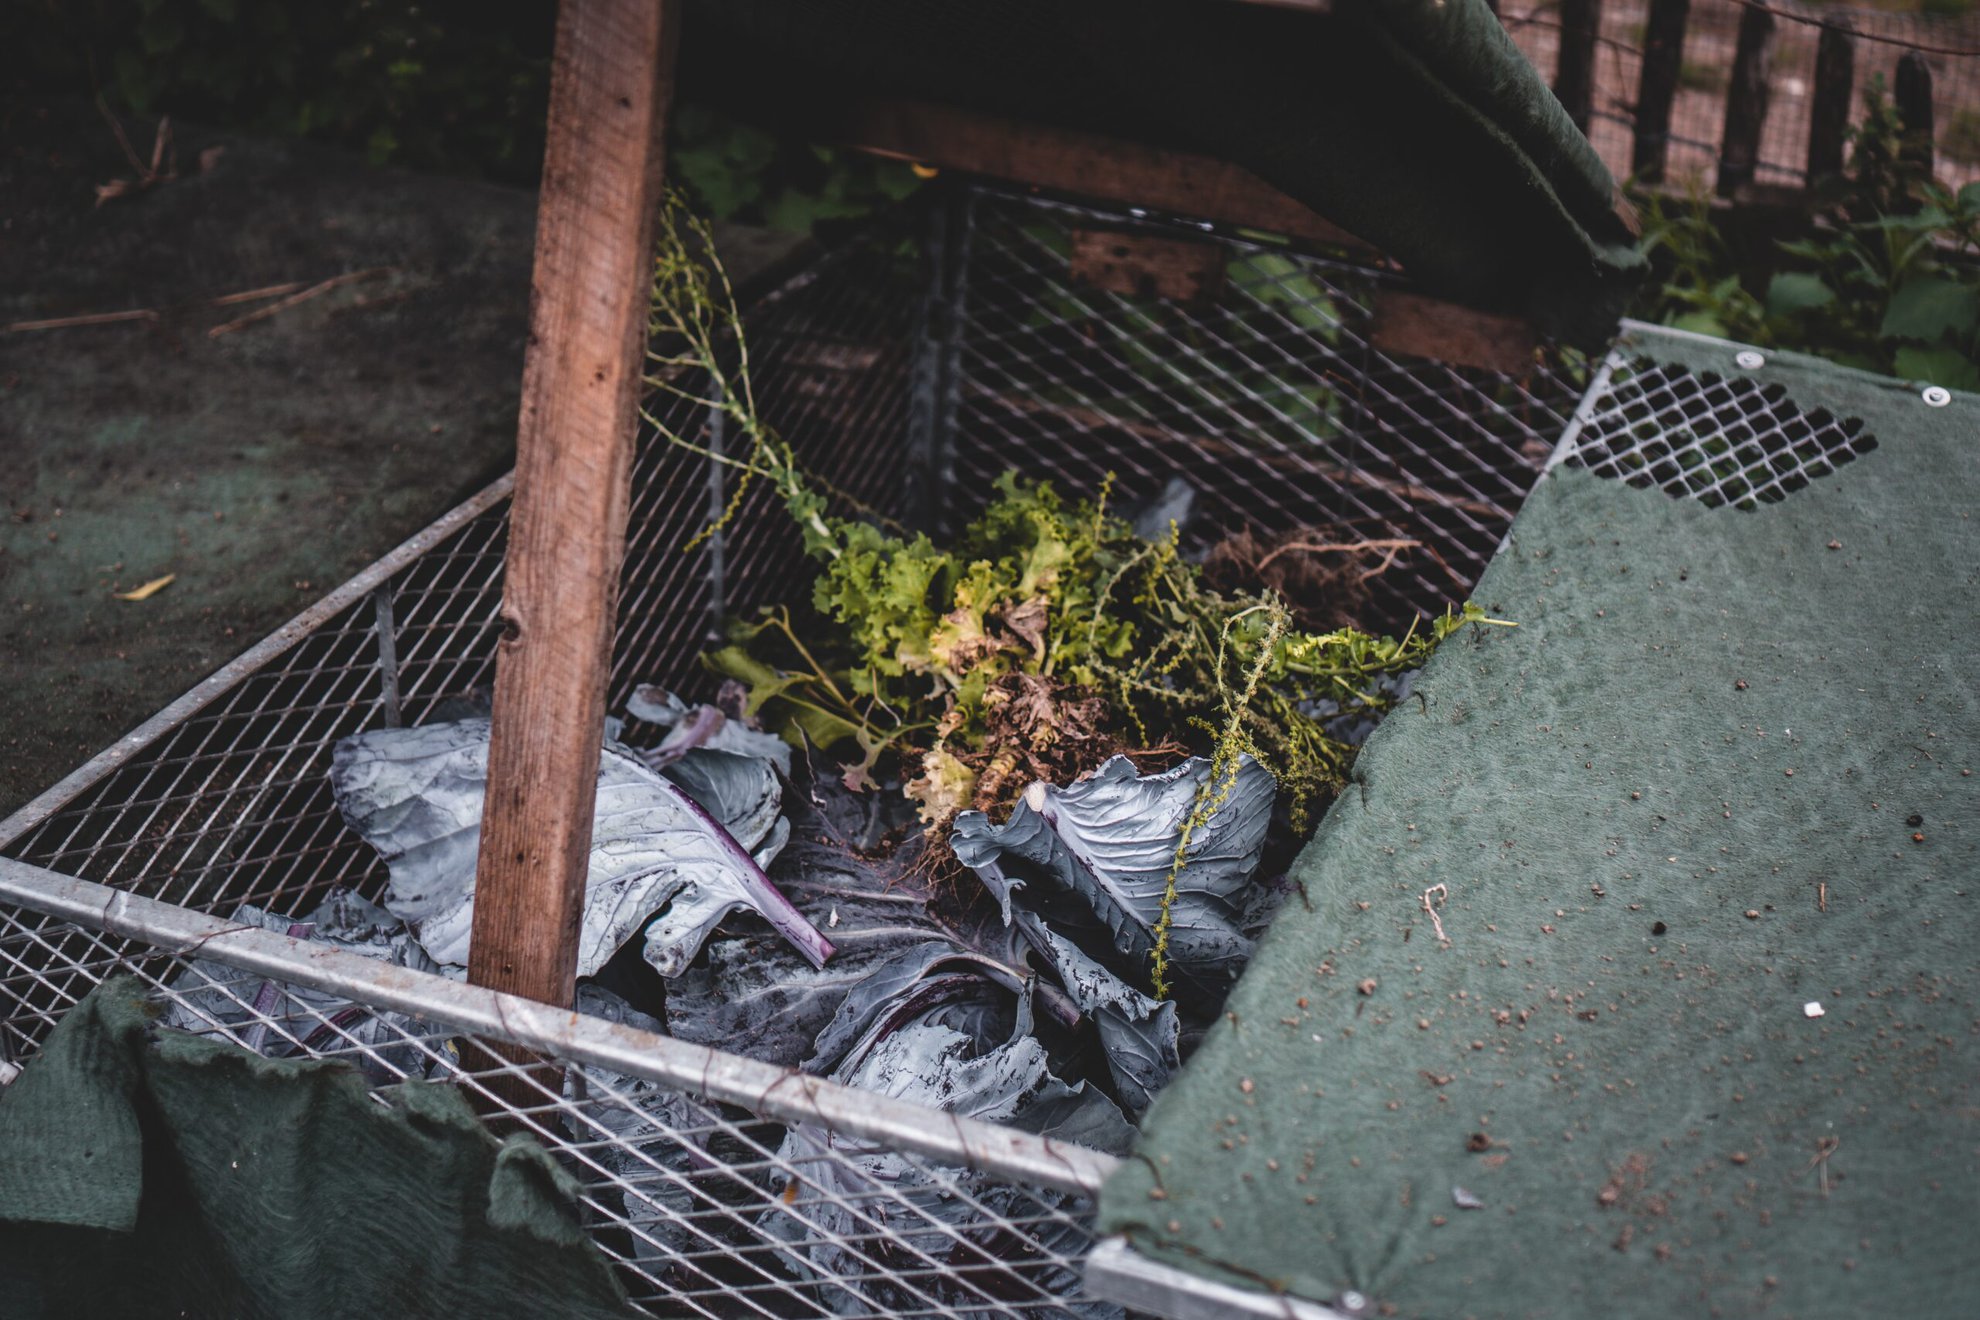 Diverting food waste from landfills can greatly contribute to reducing green house gases. (Credit: Jonathan Kemper via Unsplash)